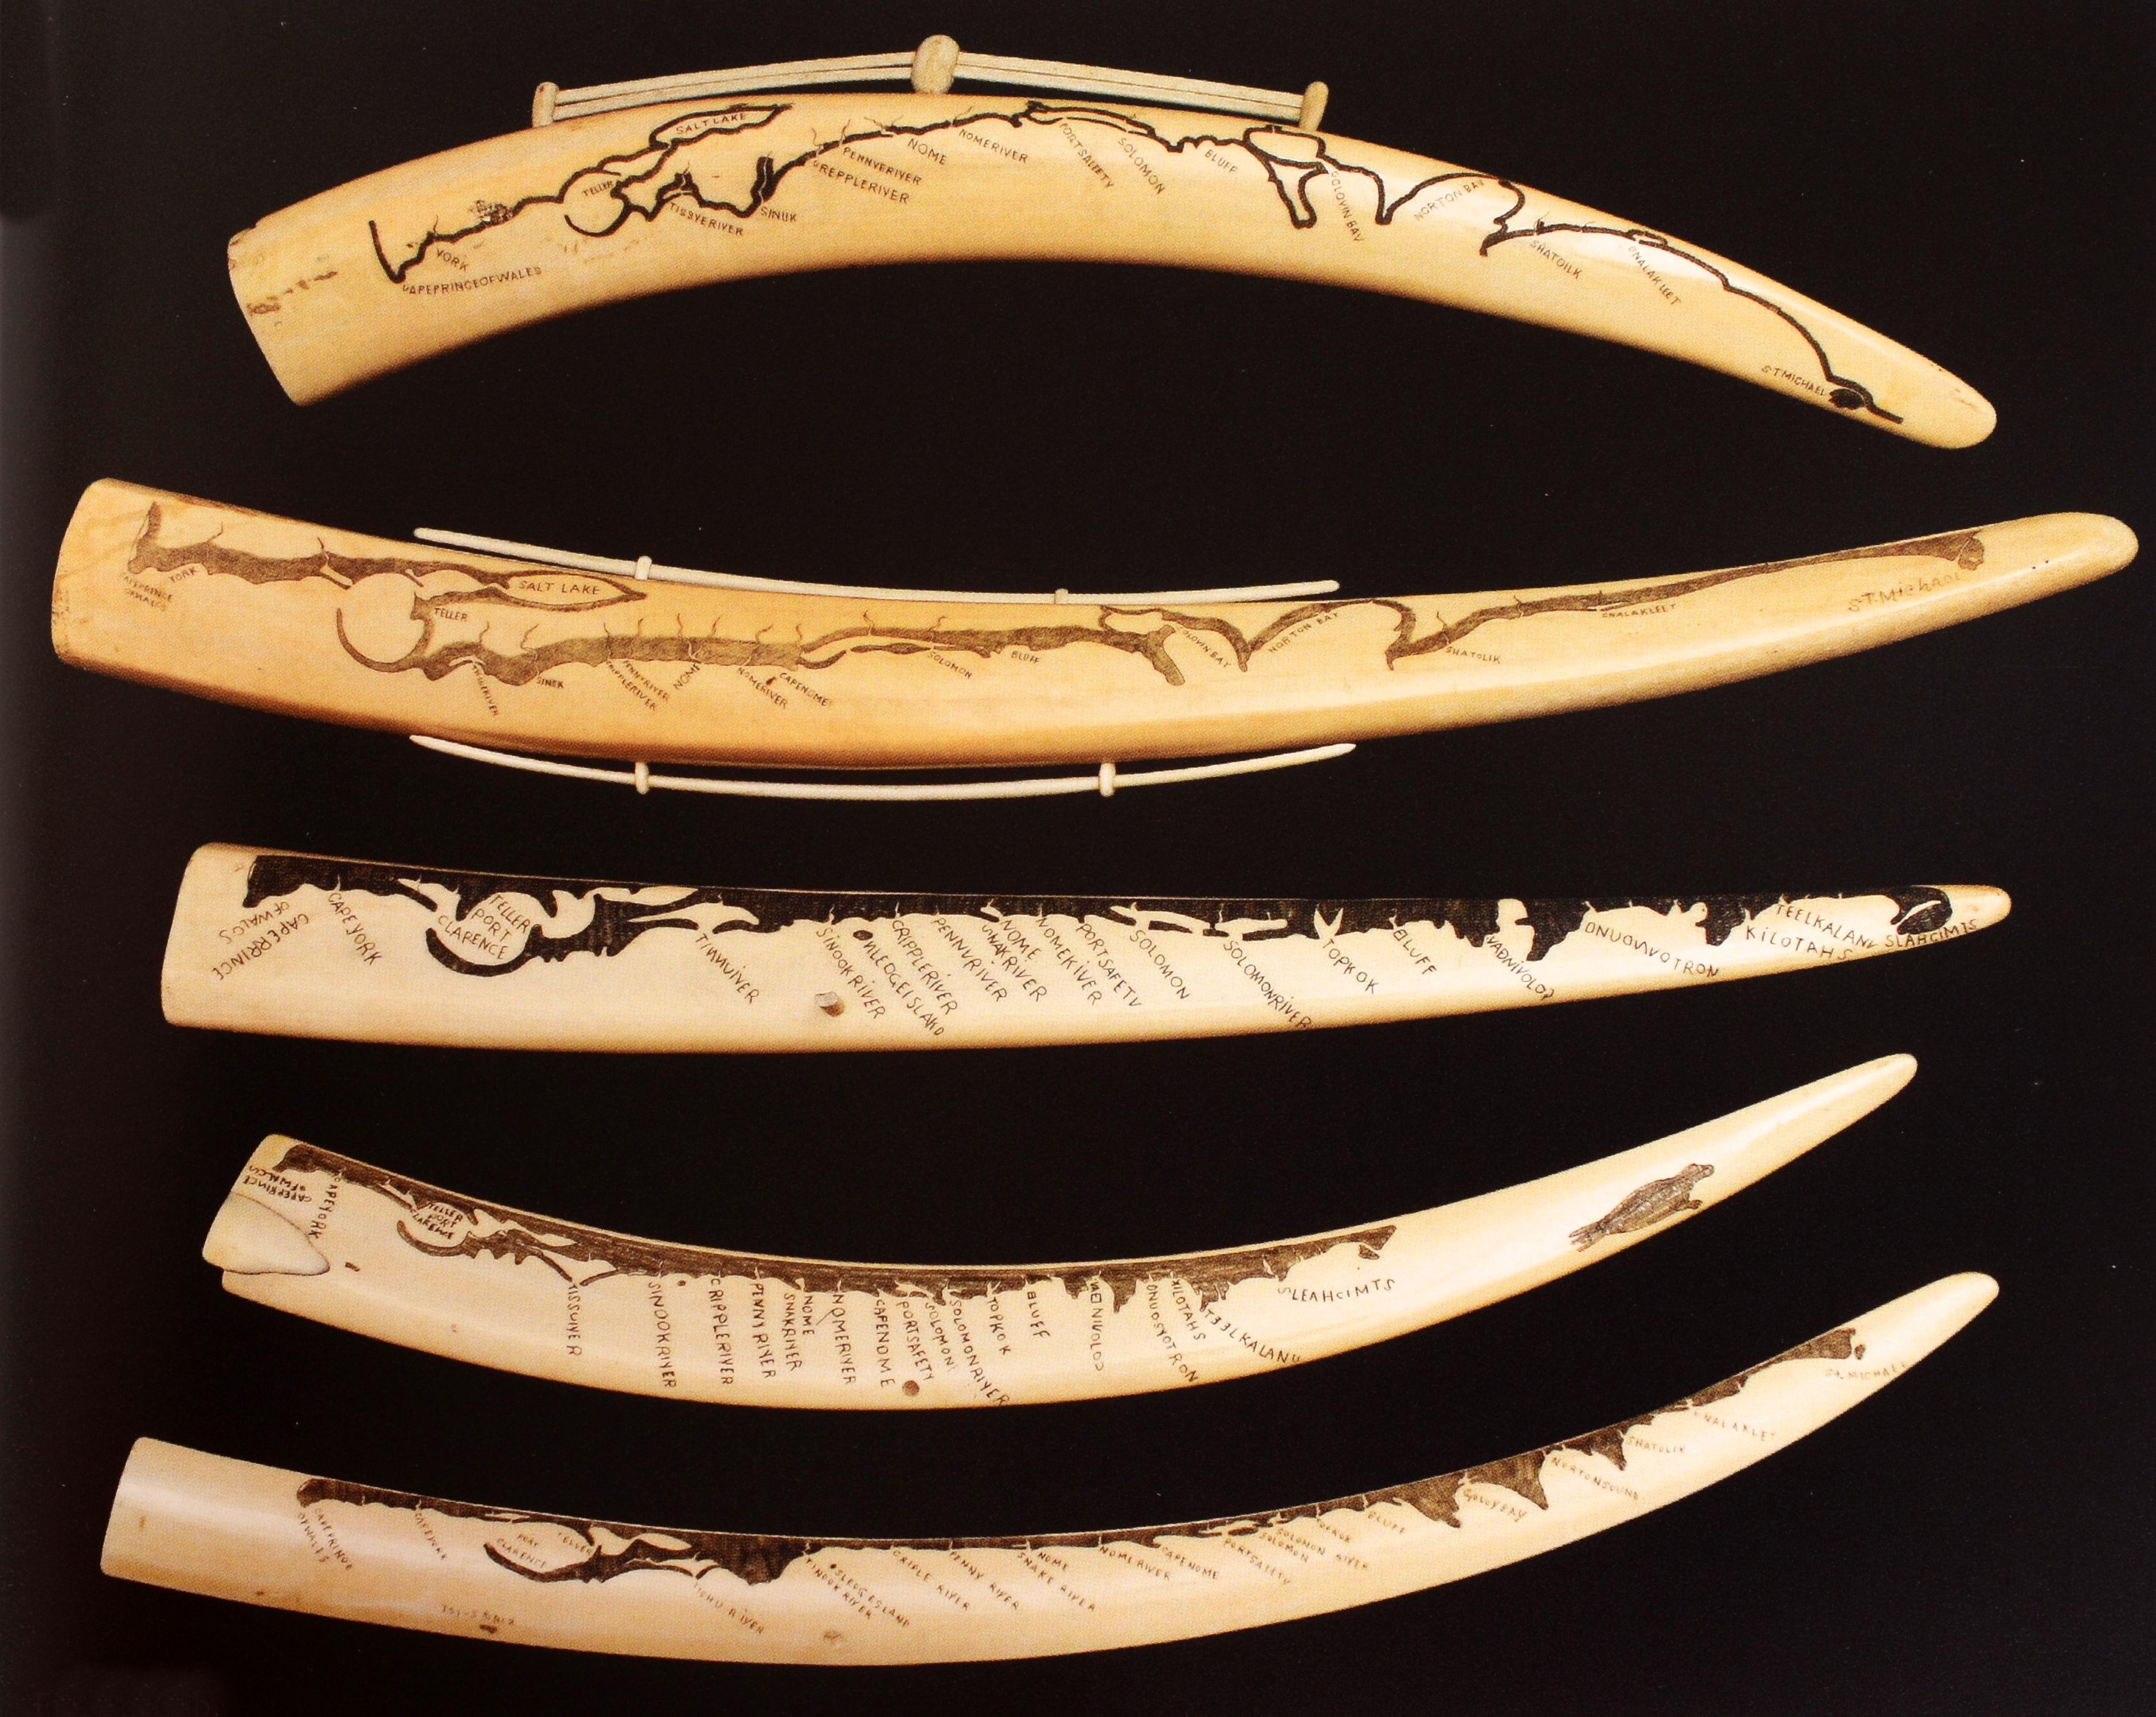 Ingenious Contrivances, Curiously Carved Scrimshaw, New Bedford Whaling Museum For Sale 10